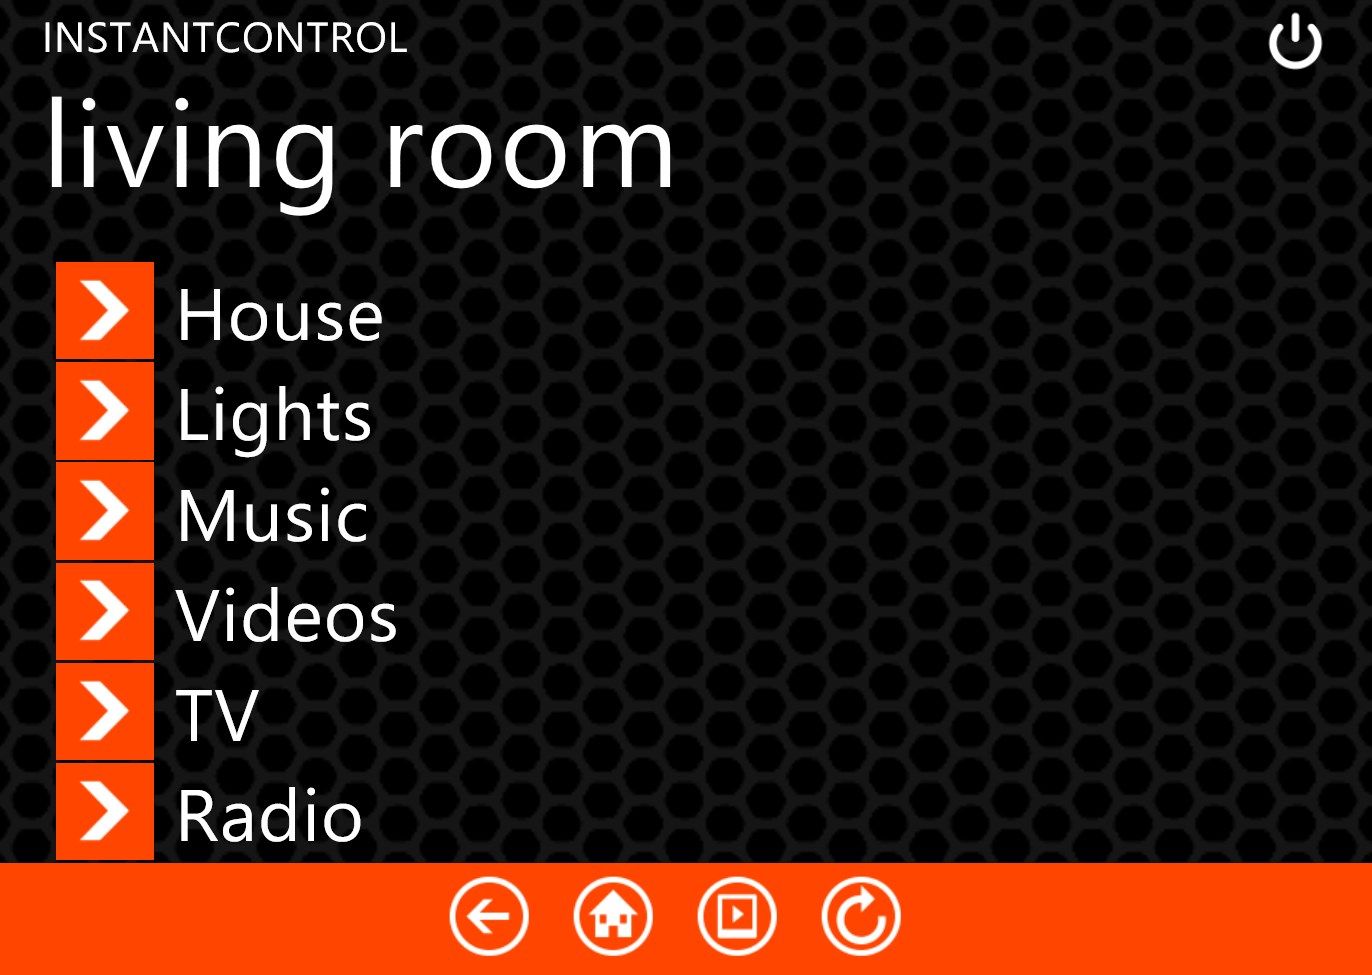 Access all major Control4 features